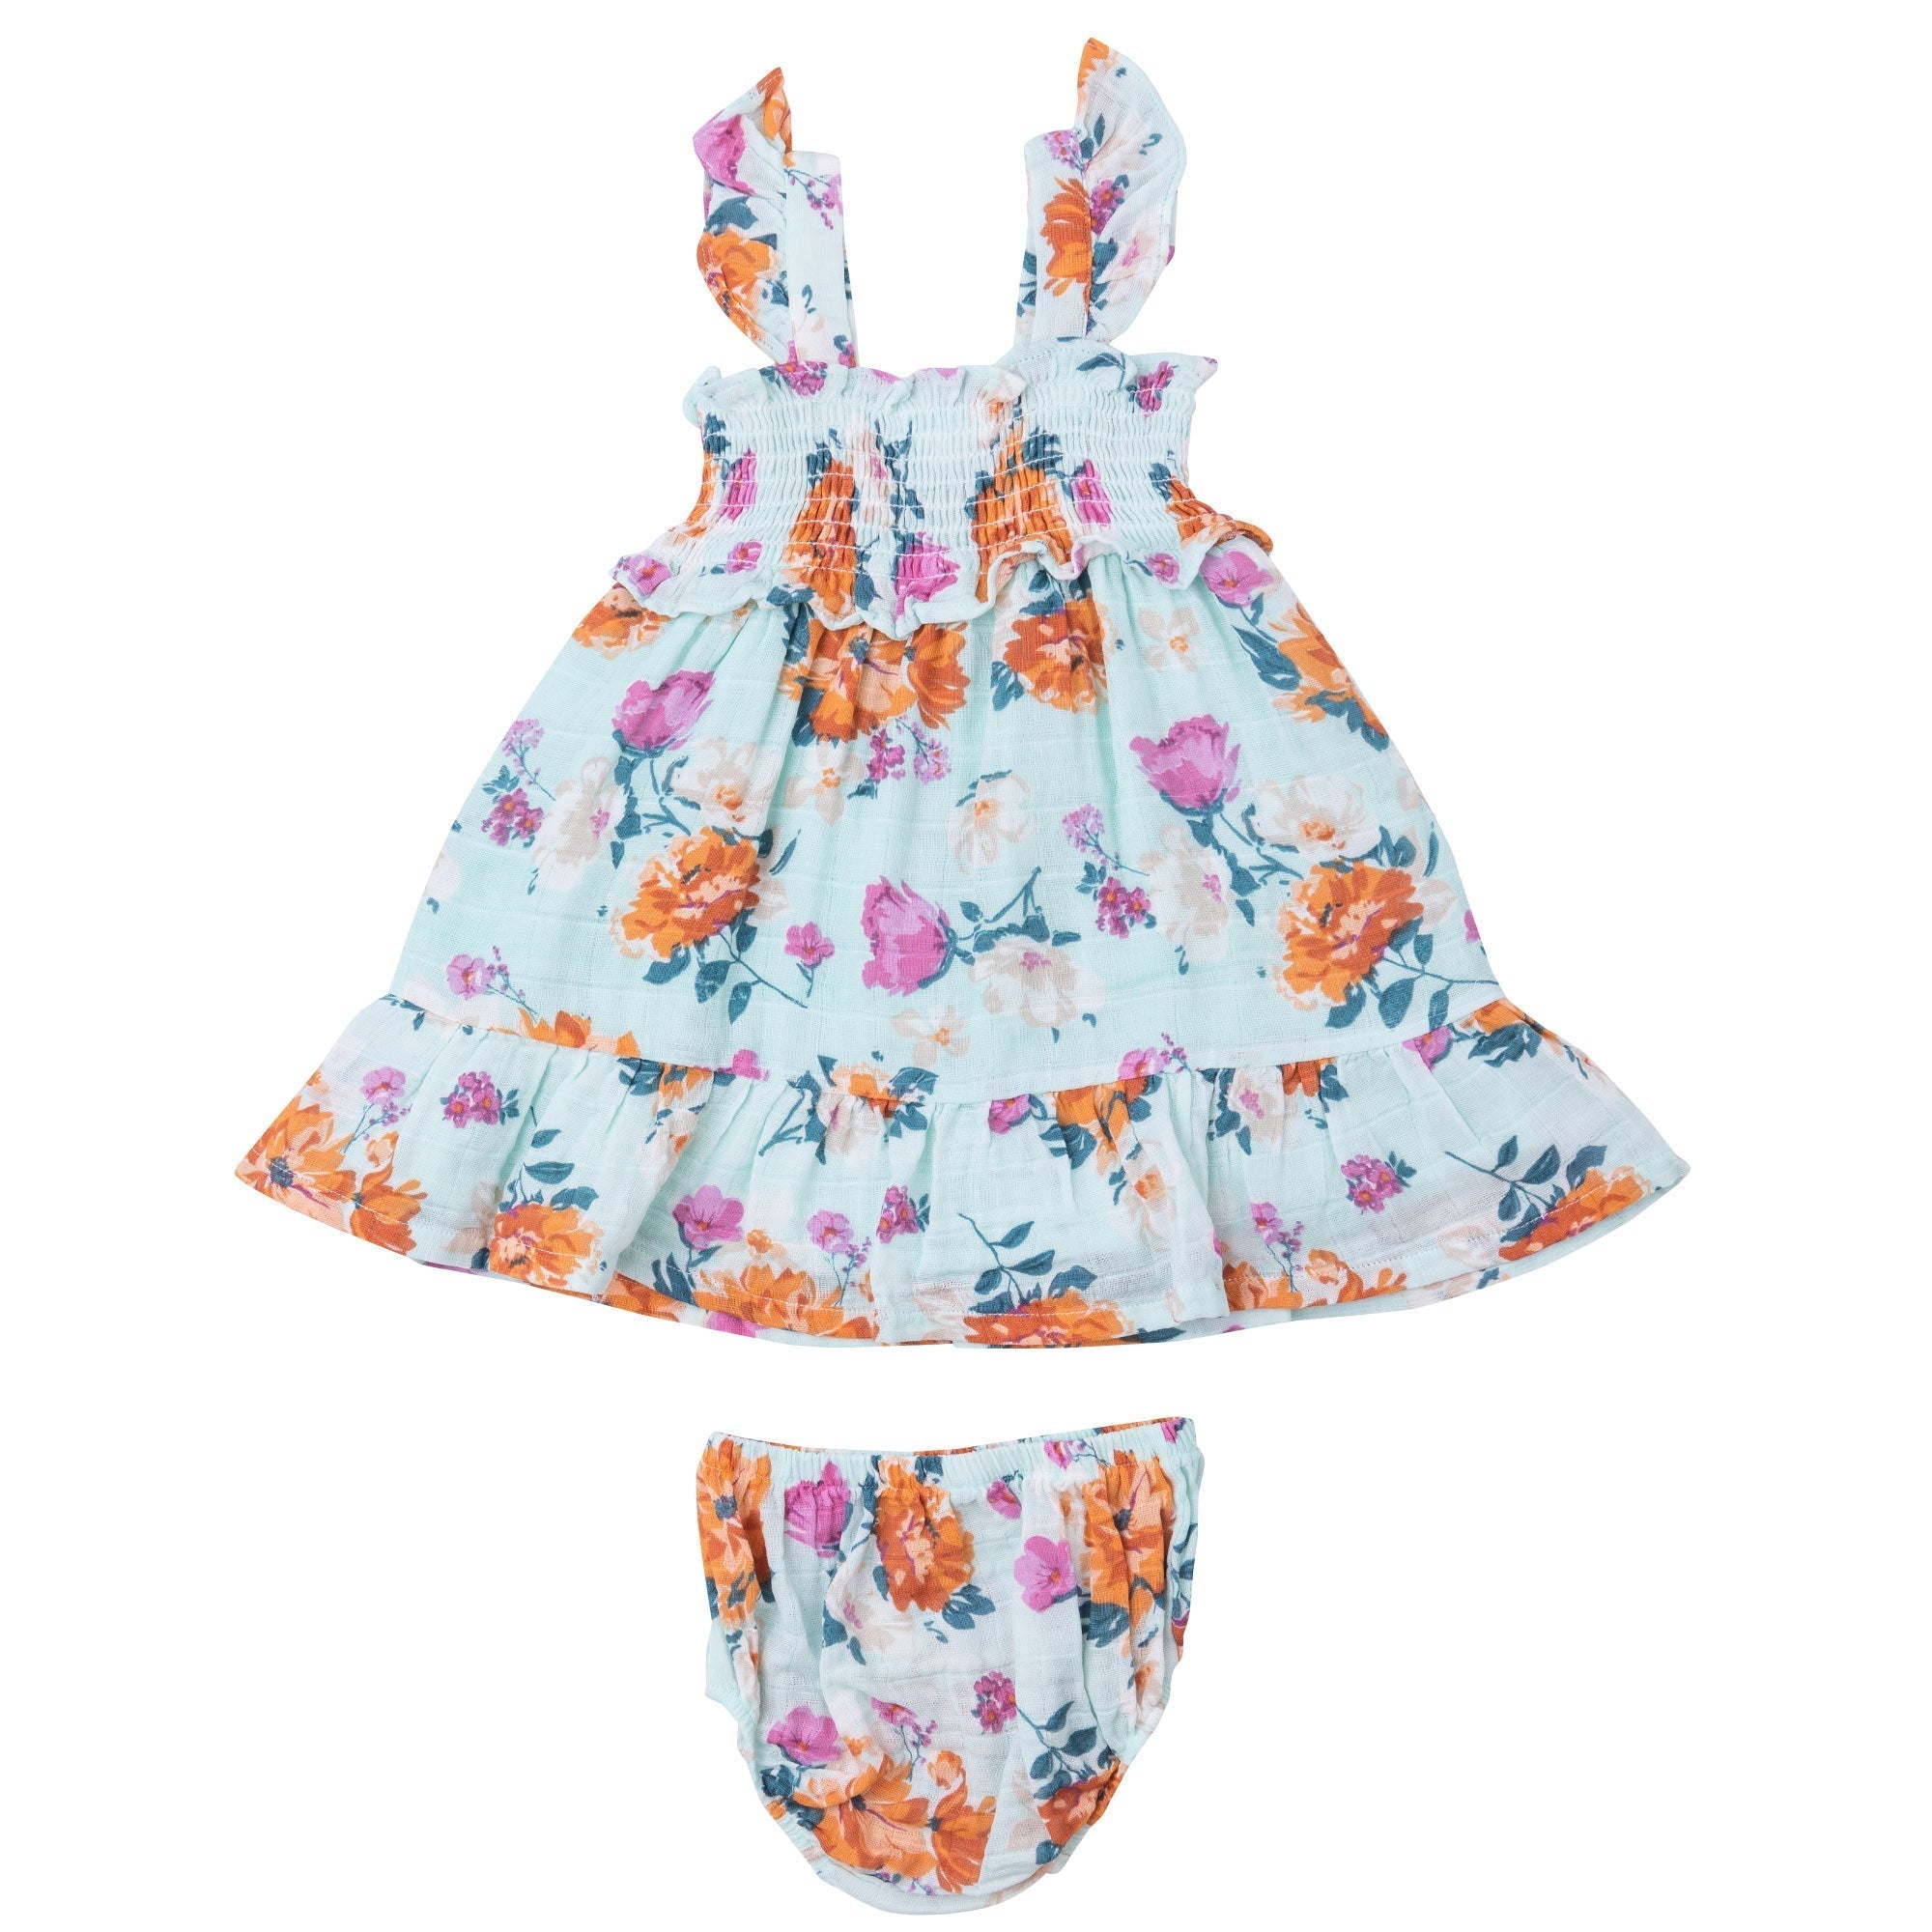 Smocked Ruffle Sundress & Diaper Cover - Soft Petals Floral